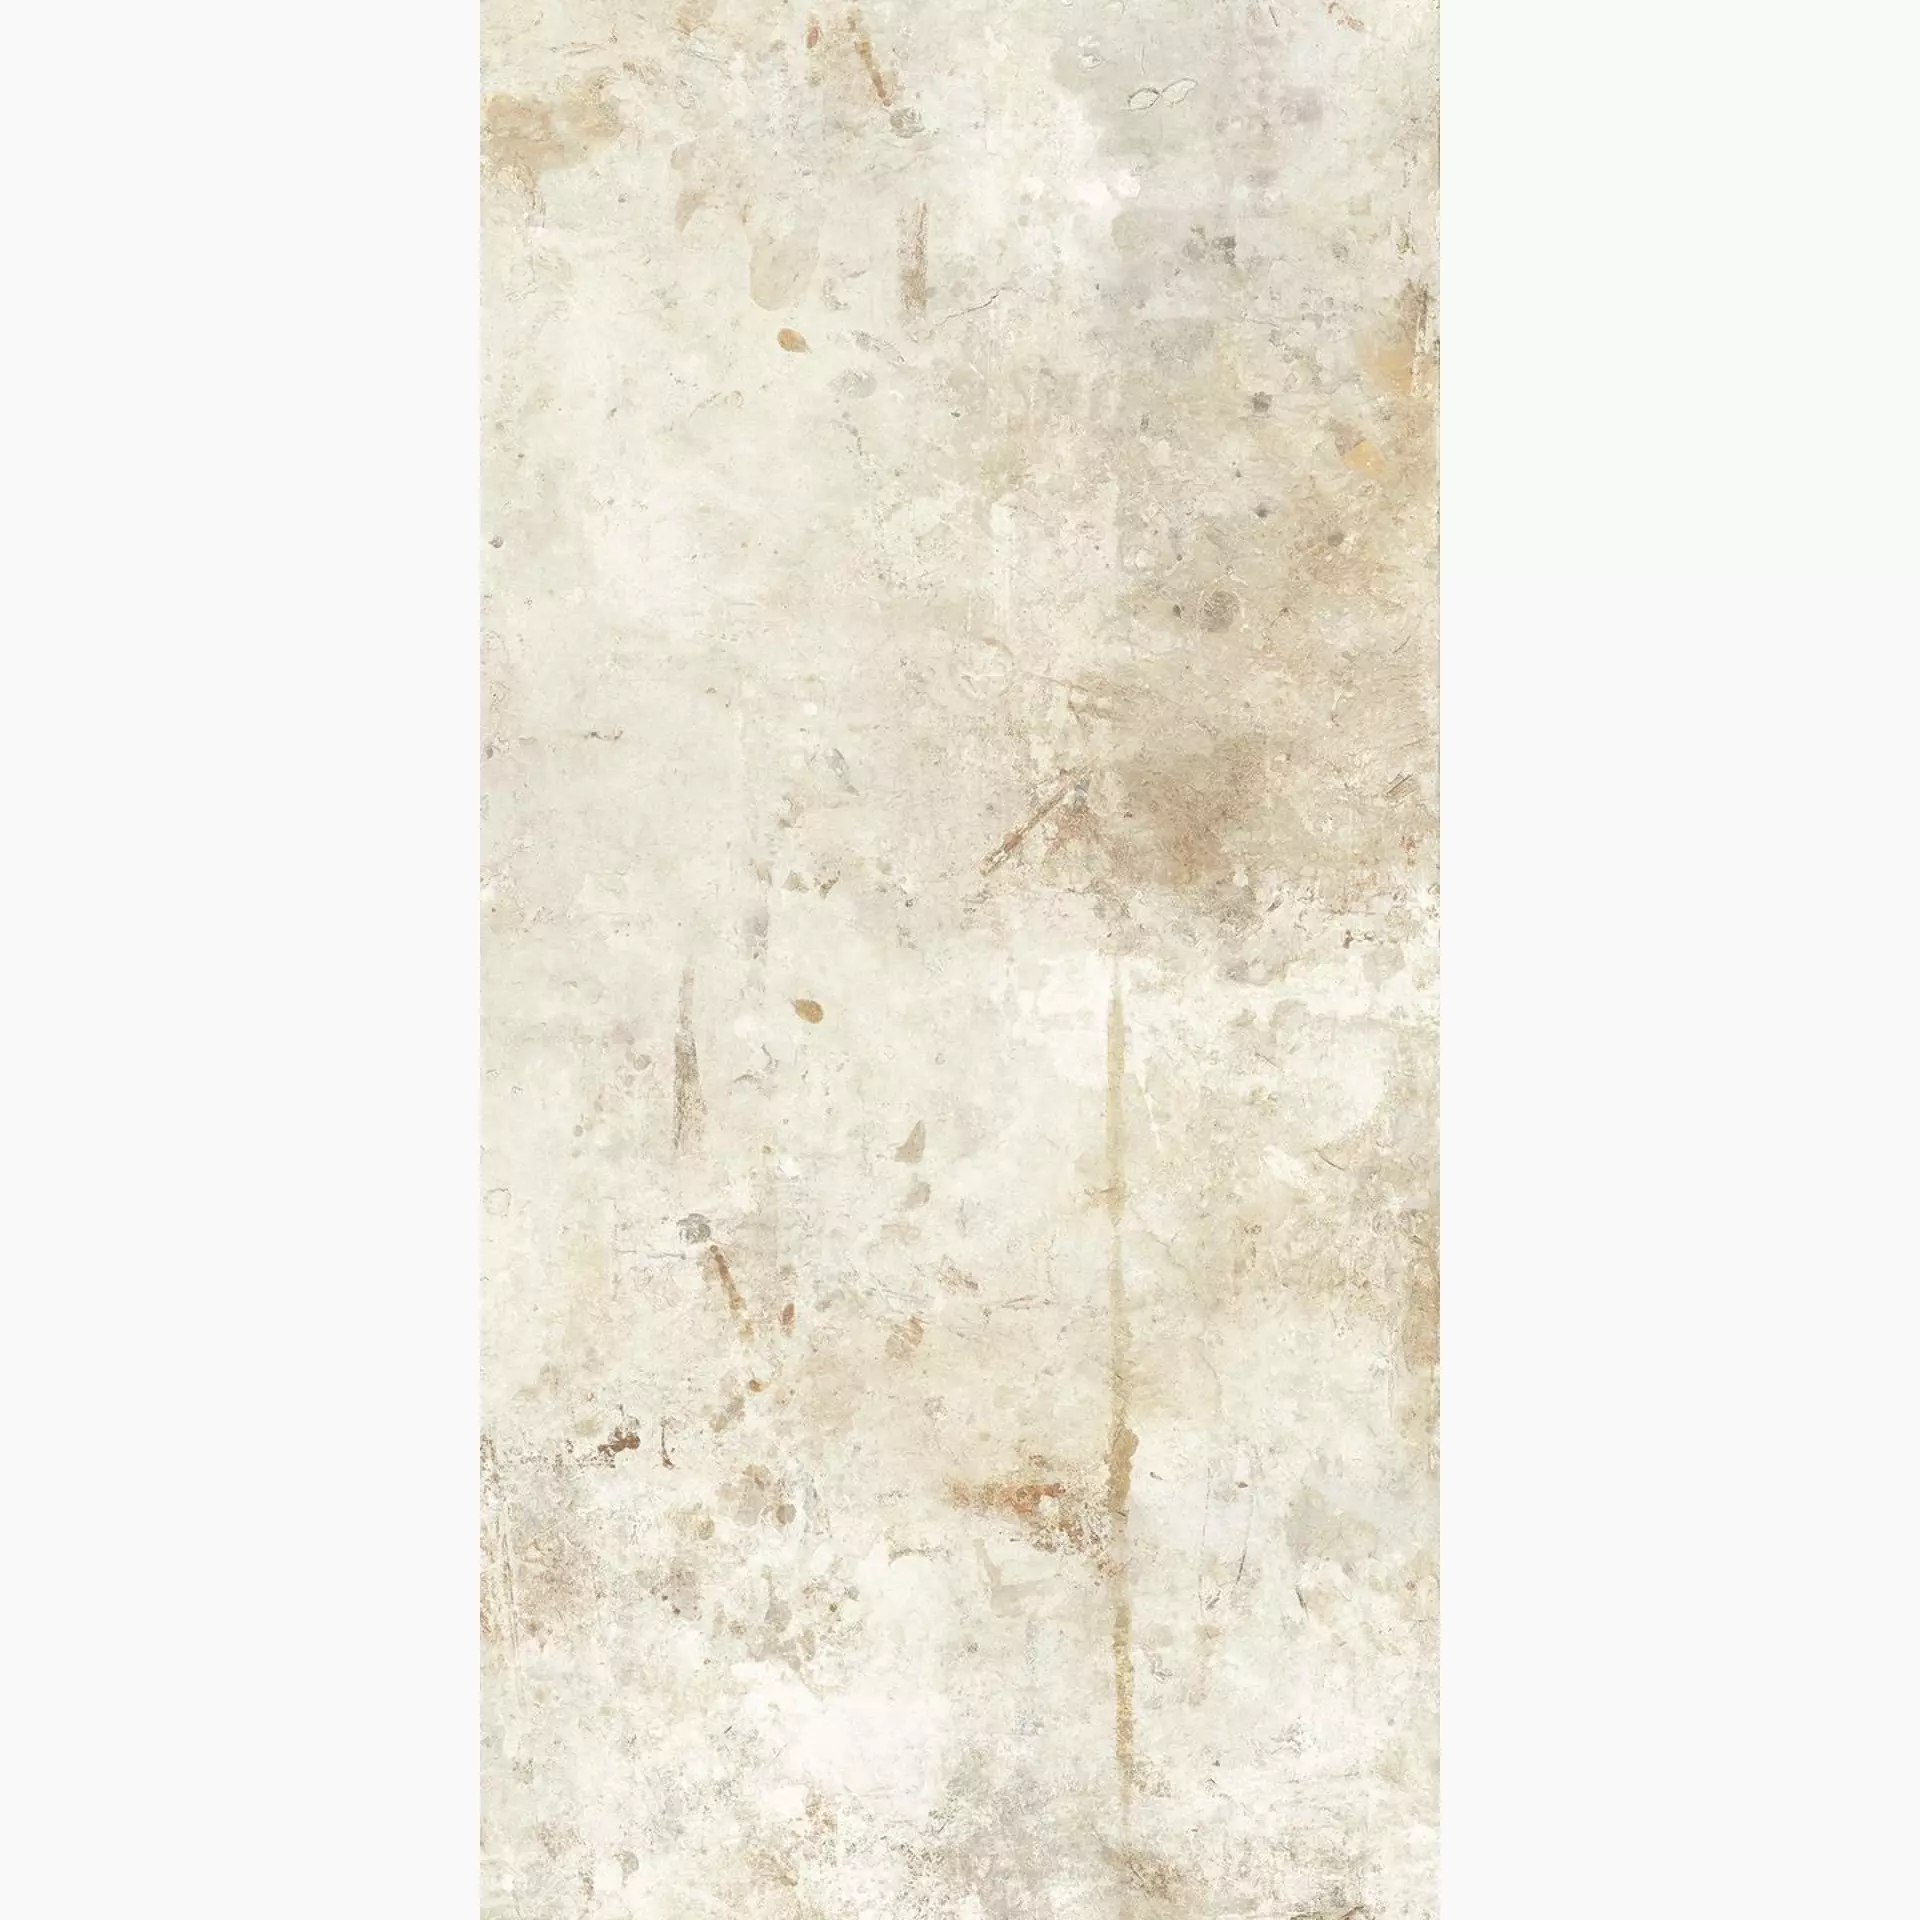 Fondovalle Action Light Natural ACT063 60x120cm rectified 6,5mm